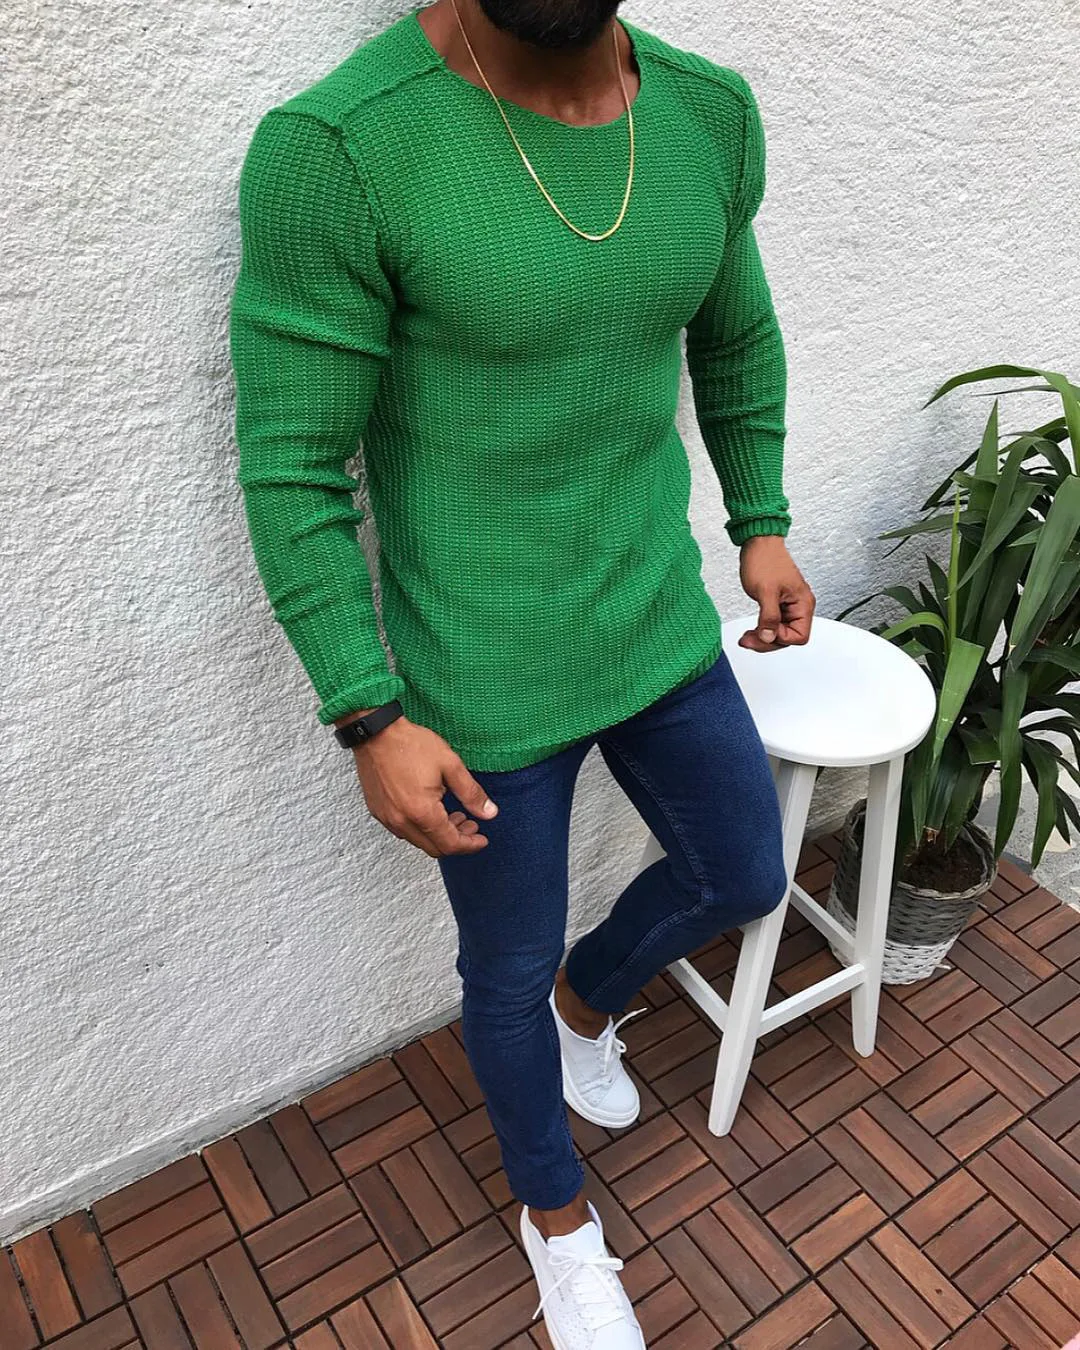 Fubotevic Mens Long Sleeve Knitted Slim Round Neck Solid Thermal Pullover Sweater Jumper